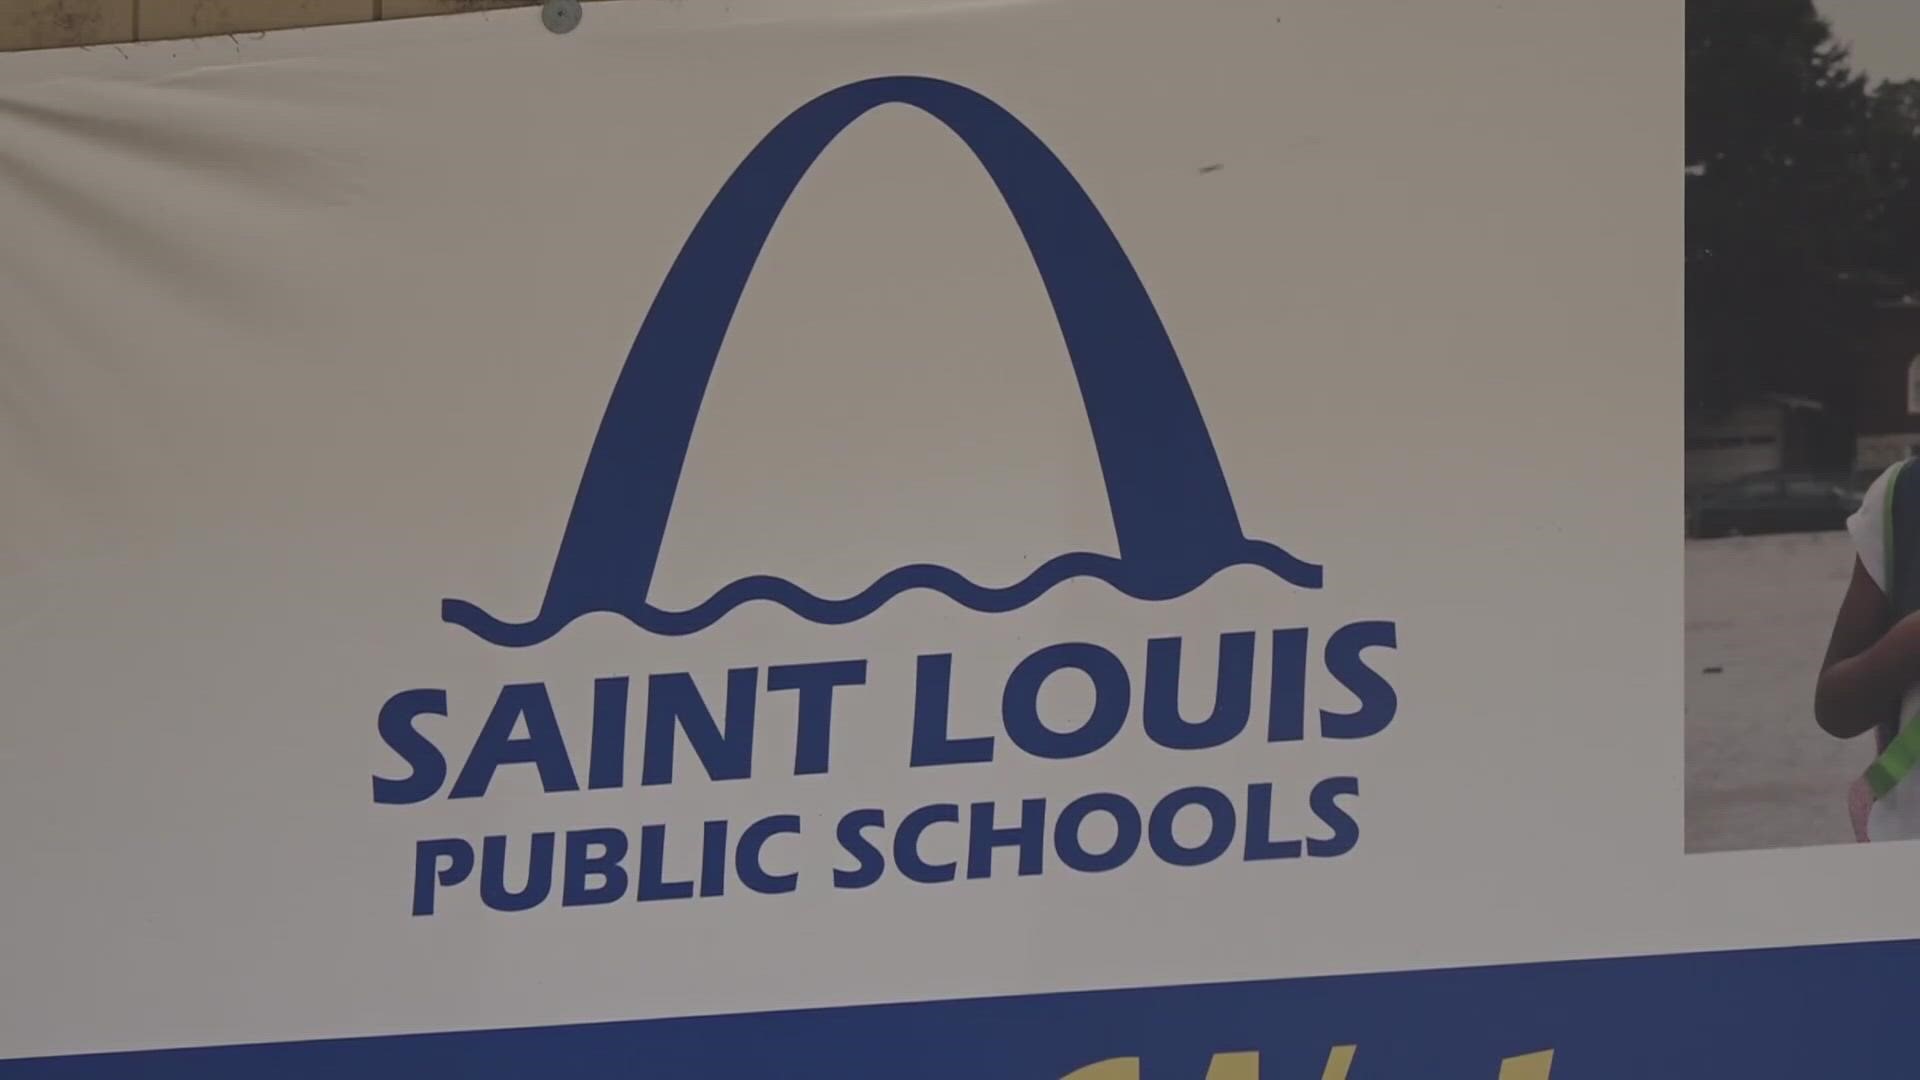 Forty-nine people applied for the job, and now St. Louis Public Schools has narrowed its candidates for superintendent down to just three.